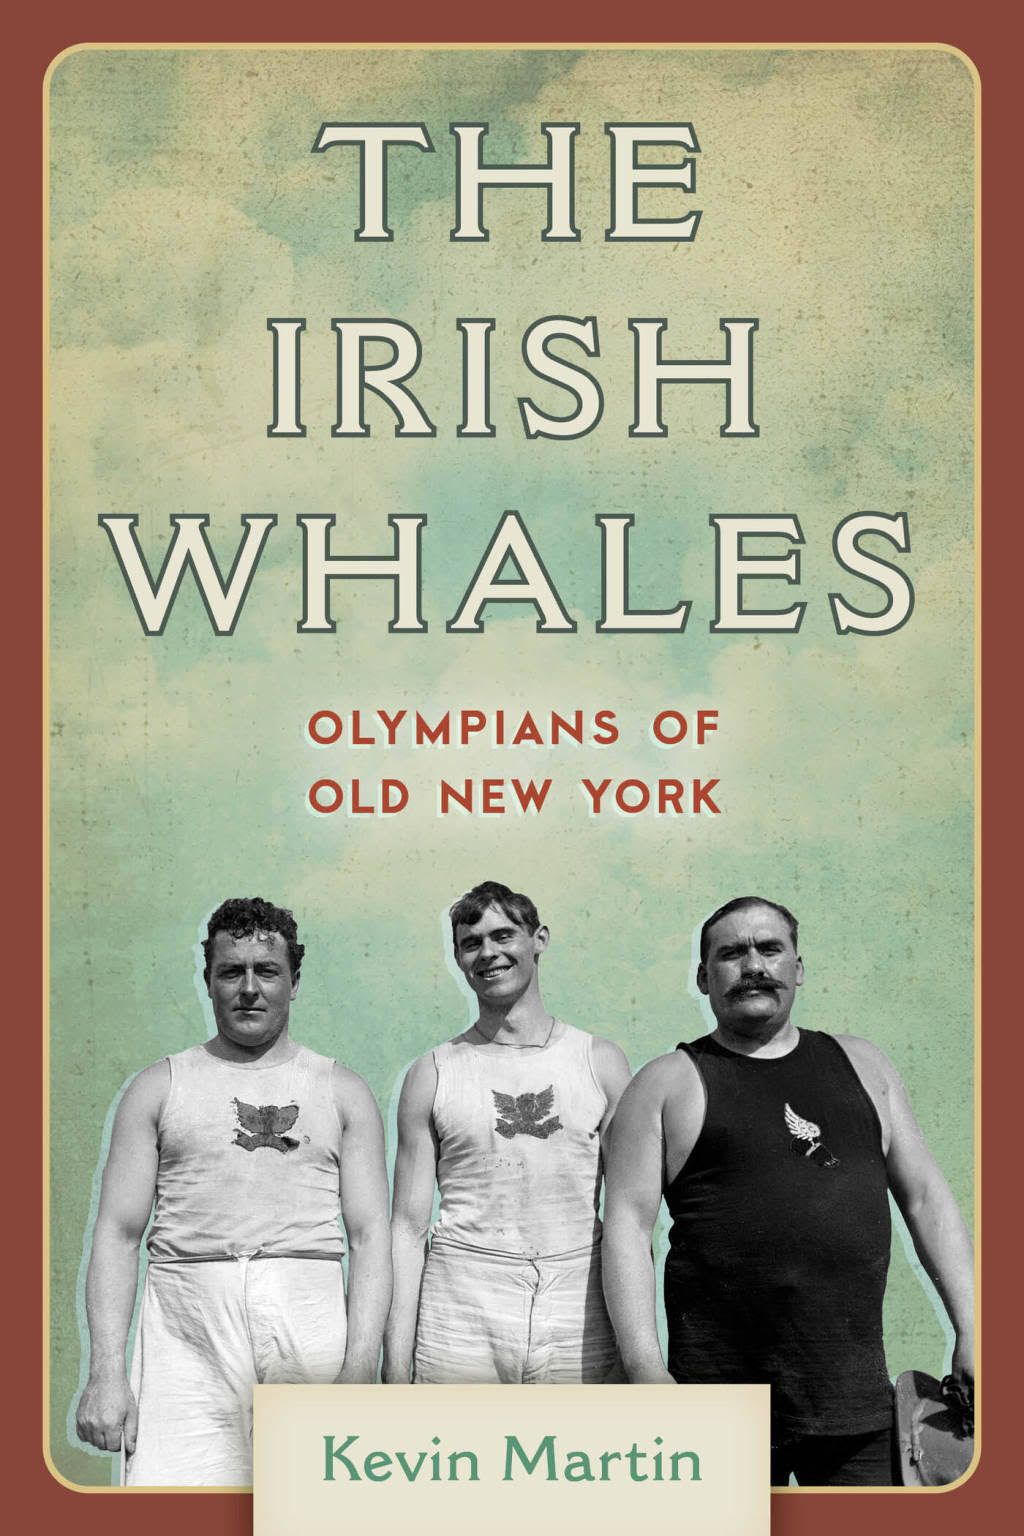 The Irish Whales by Kevin Martin